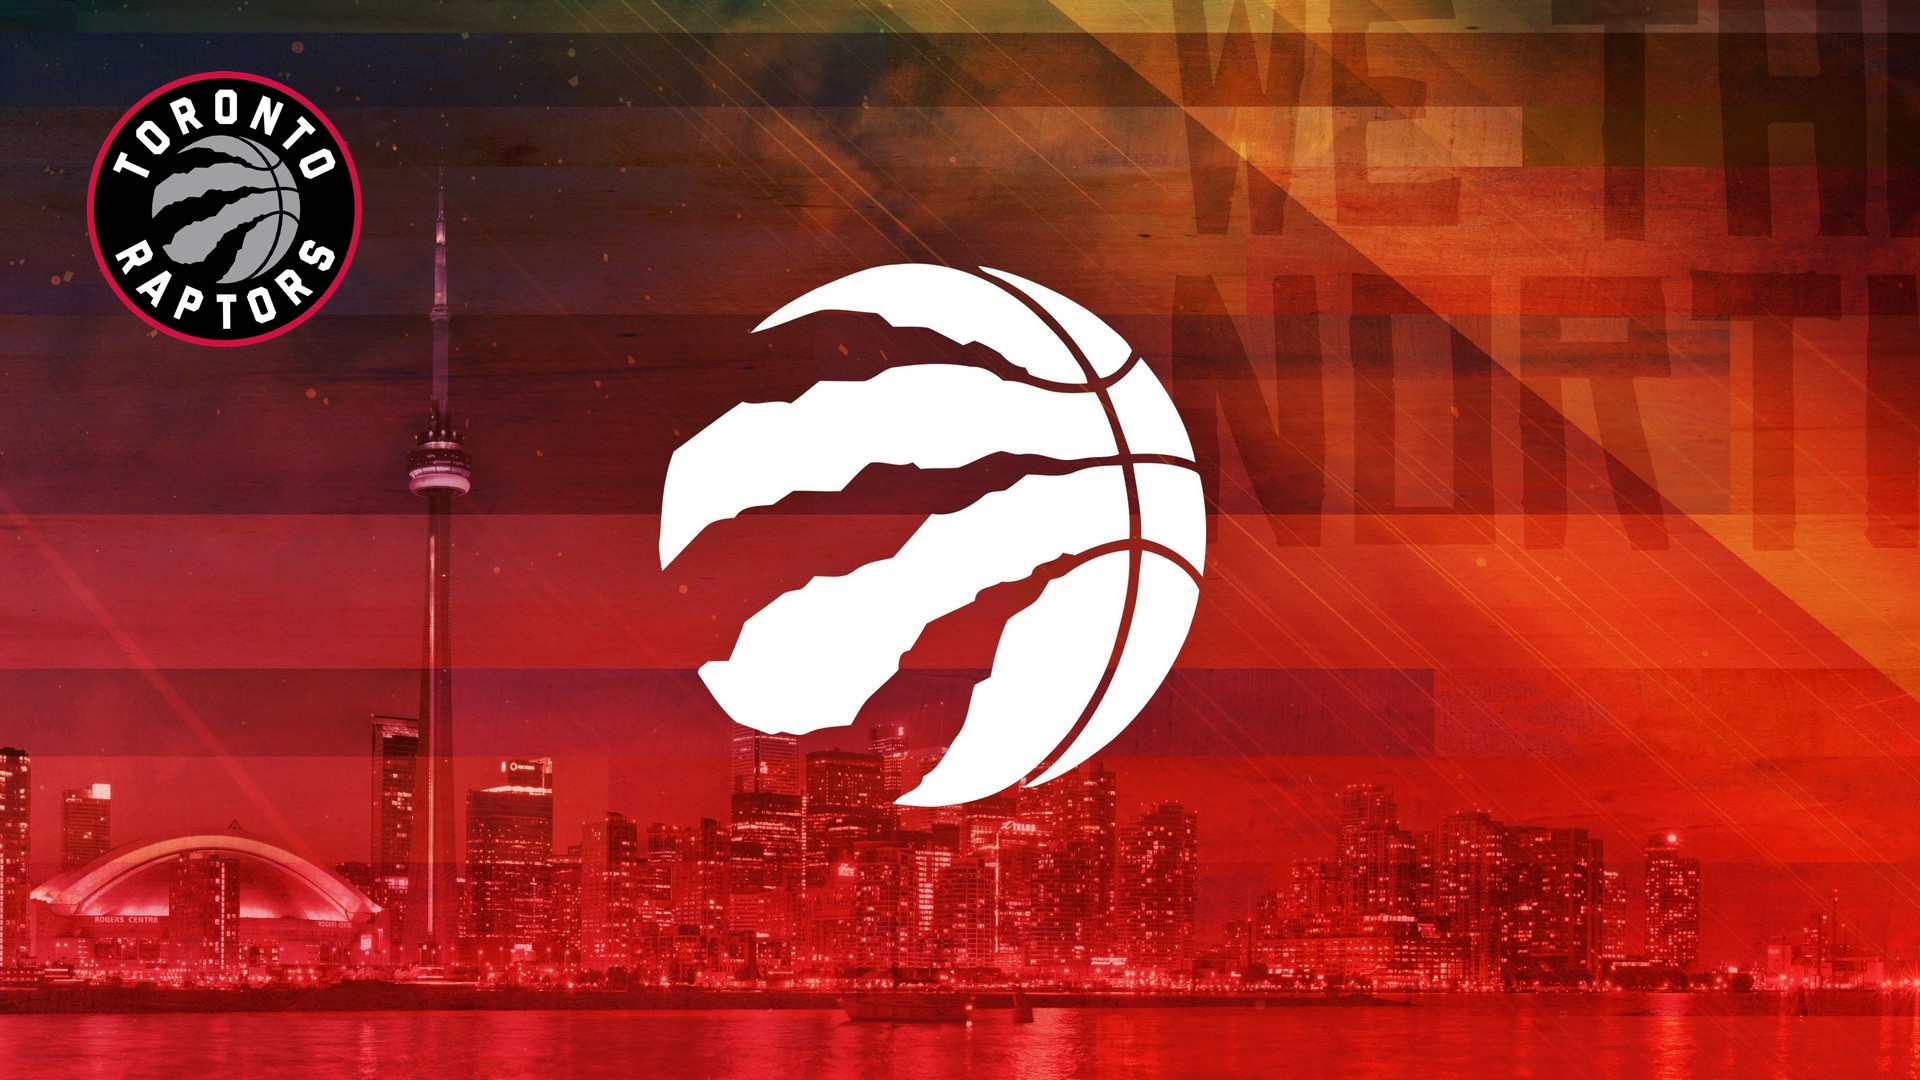 Toronto Raptors For Desktop Wallpaper with image dimensions 1920x1080 pixel. You can make this wallpaper for your Desktop Computer Backgrounds, Windows or Mac Screensavers, iPhone Lock screen, Tablet or Android and another Mobile Phone device